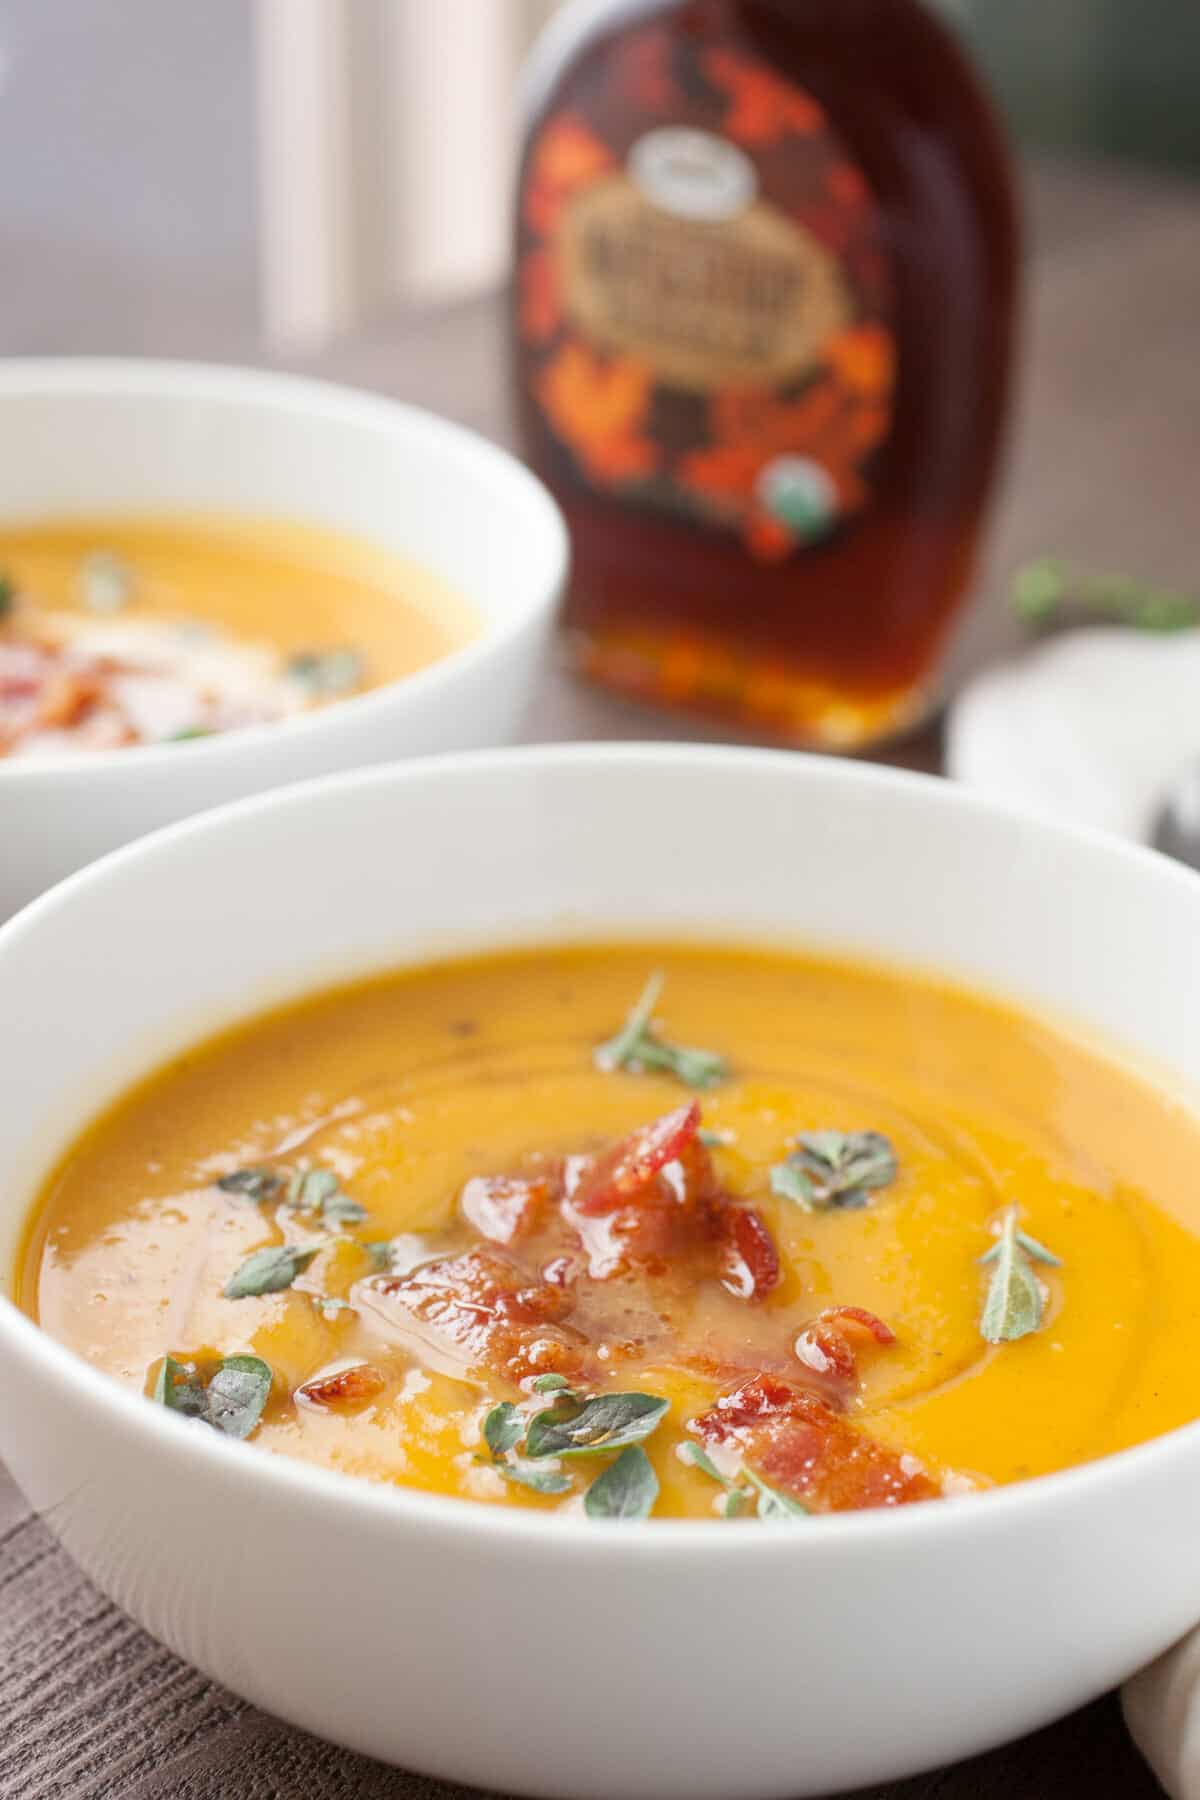 Butternut Squash Soup with Maple Bacon: Say hello to fall with this delicious roasted squash soup. The soup itself is really easy but gets a nice crunch and sweetness from crumbled maple bacon on top! YUM! | macheesmo.com